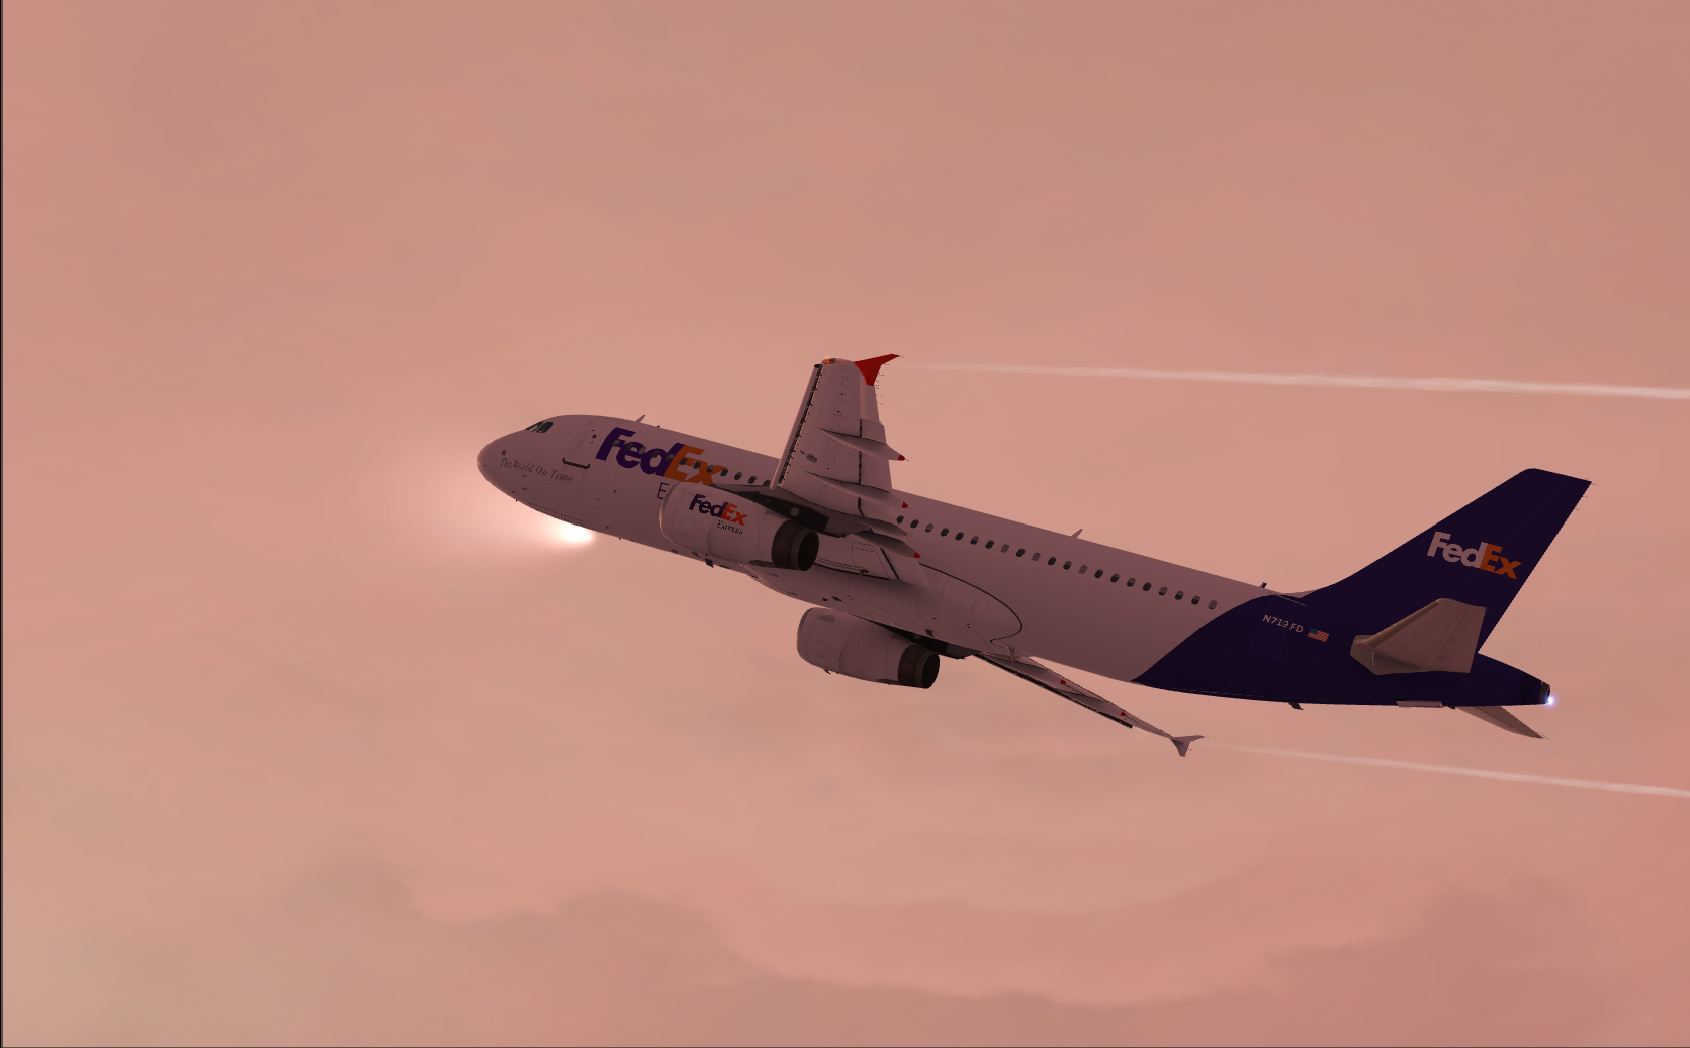 More information about "Aerosoft Airbus A320 IAE - FedEx (Fictional)"